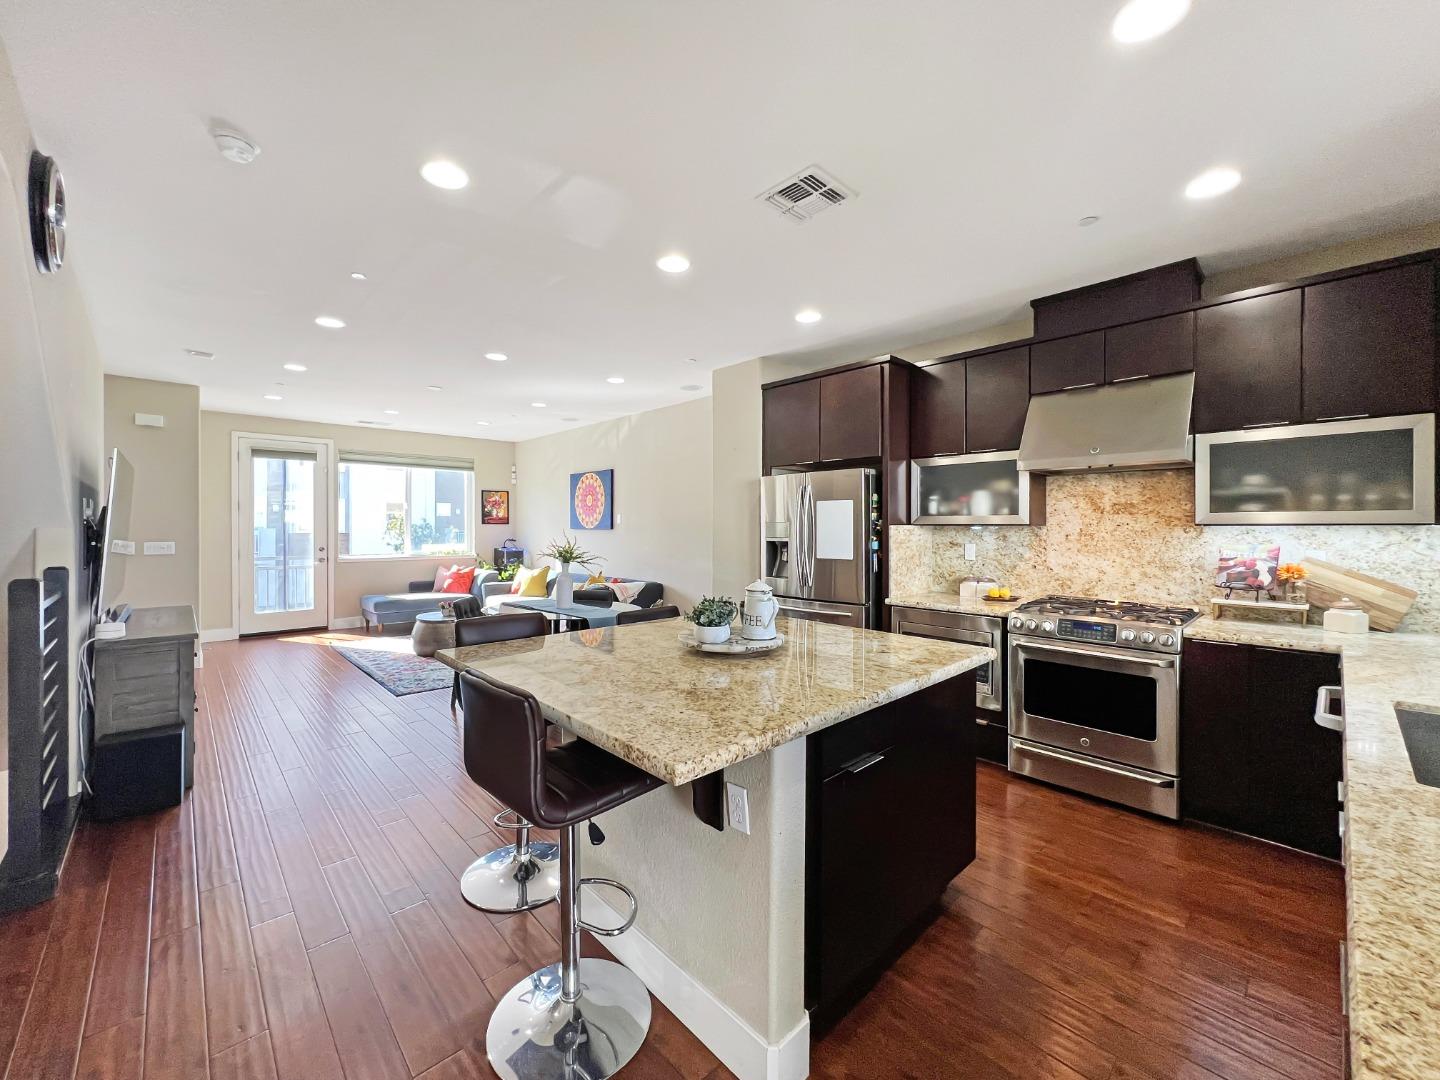 a large kitchen with stainless steel appliances a stove a sink dishwasher and a dining table with wooden floor